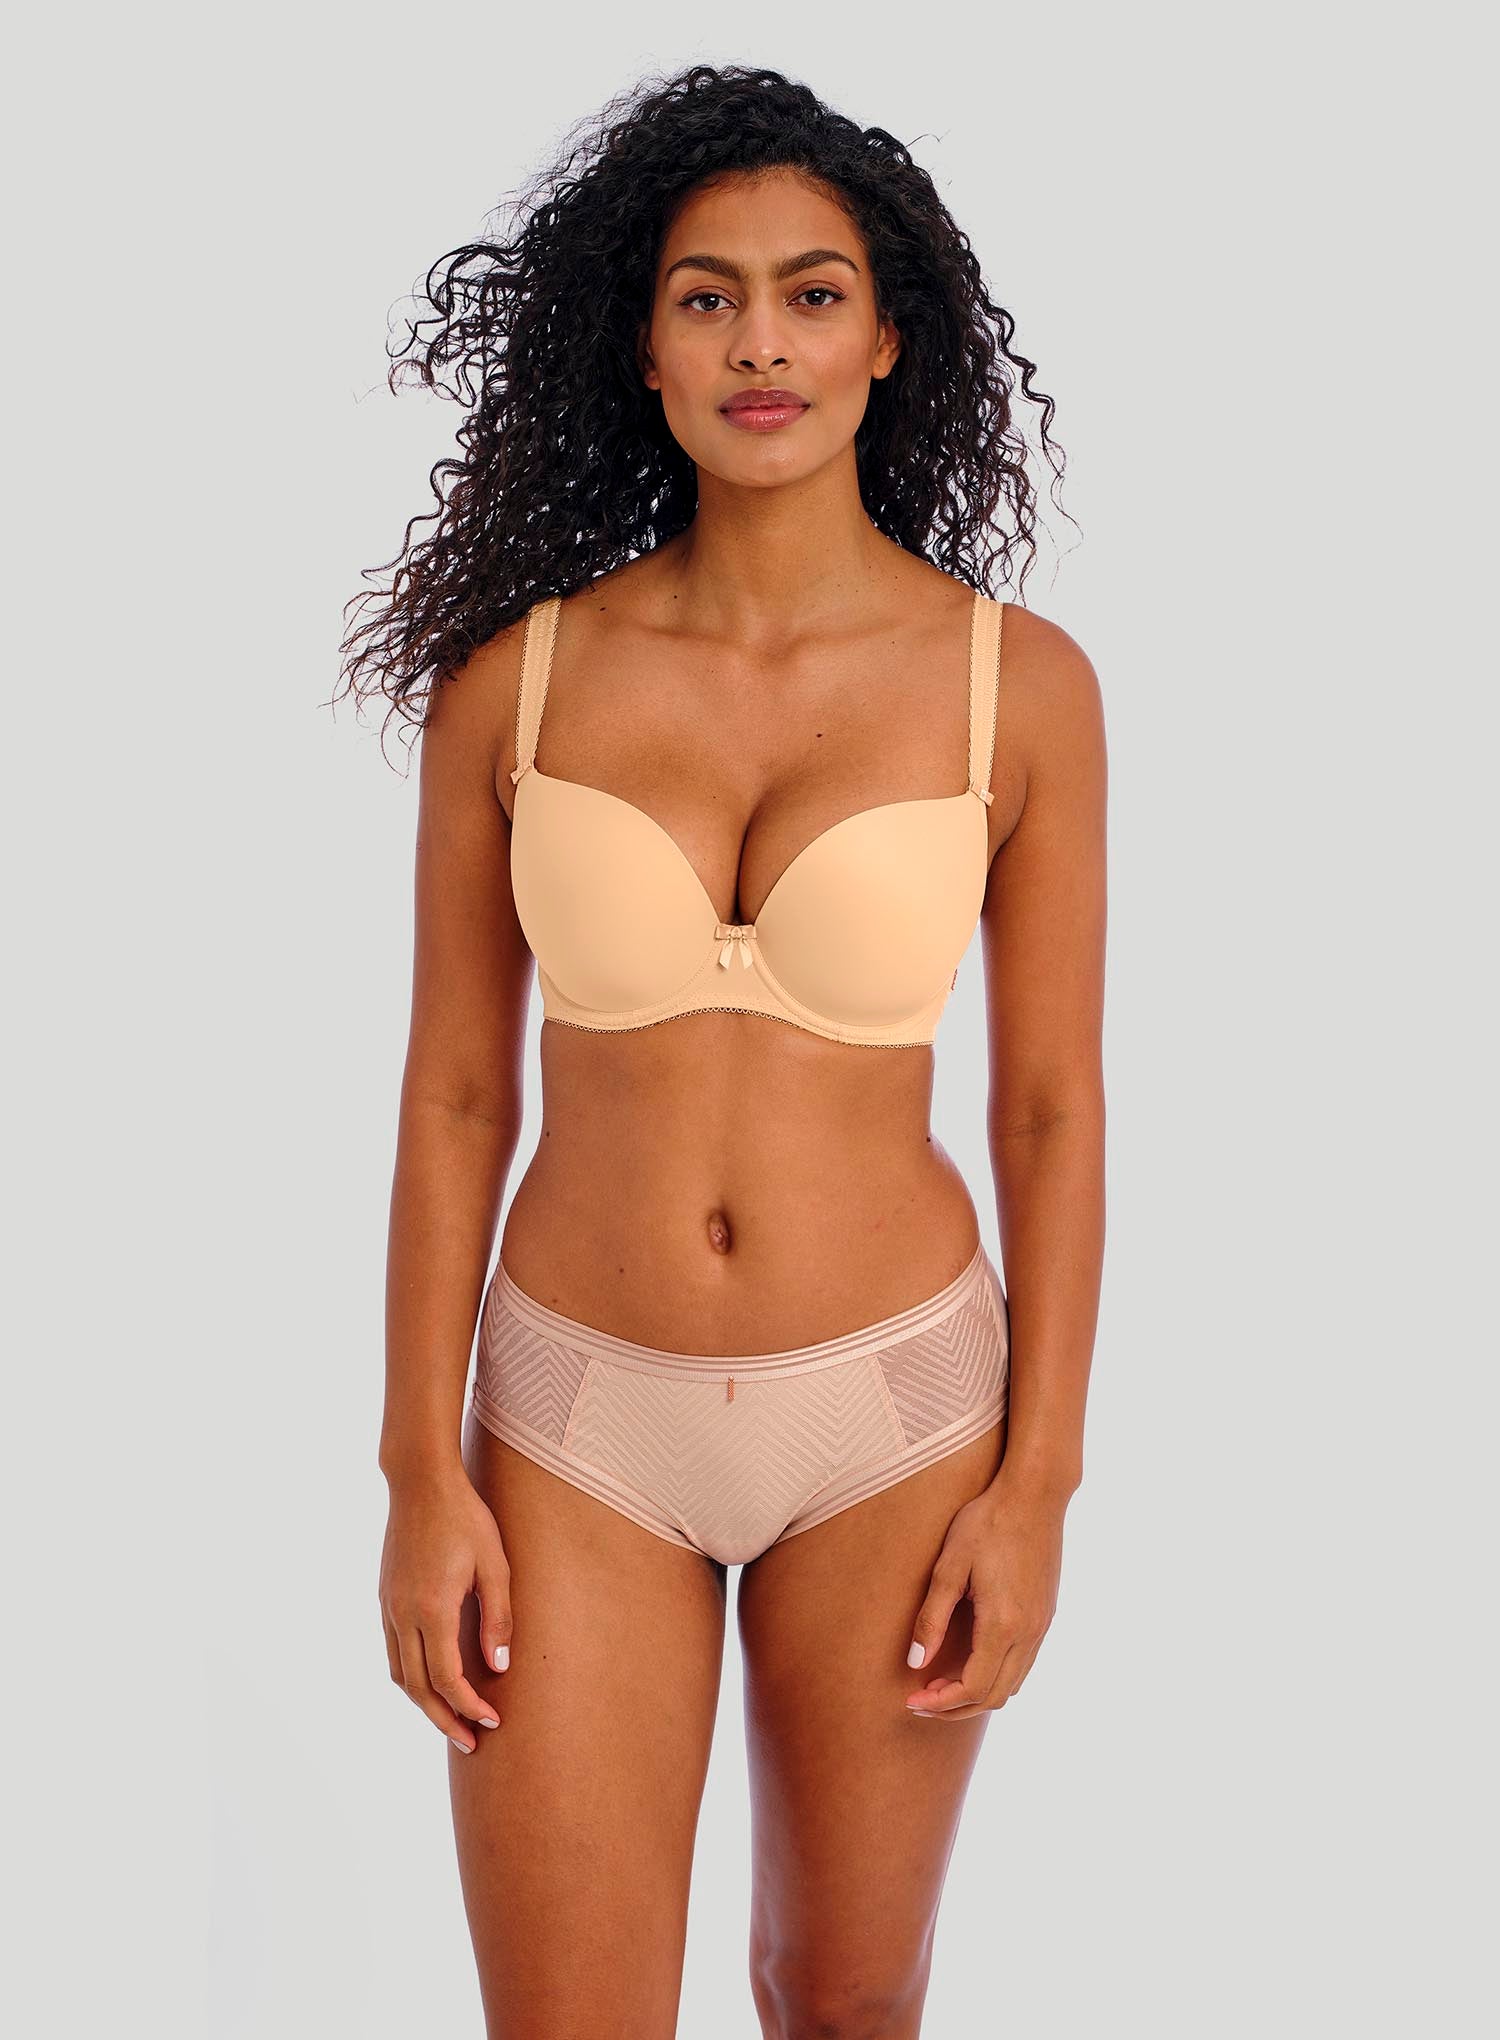 Firm Molded Bra Cup - Nude